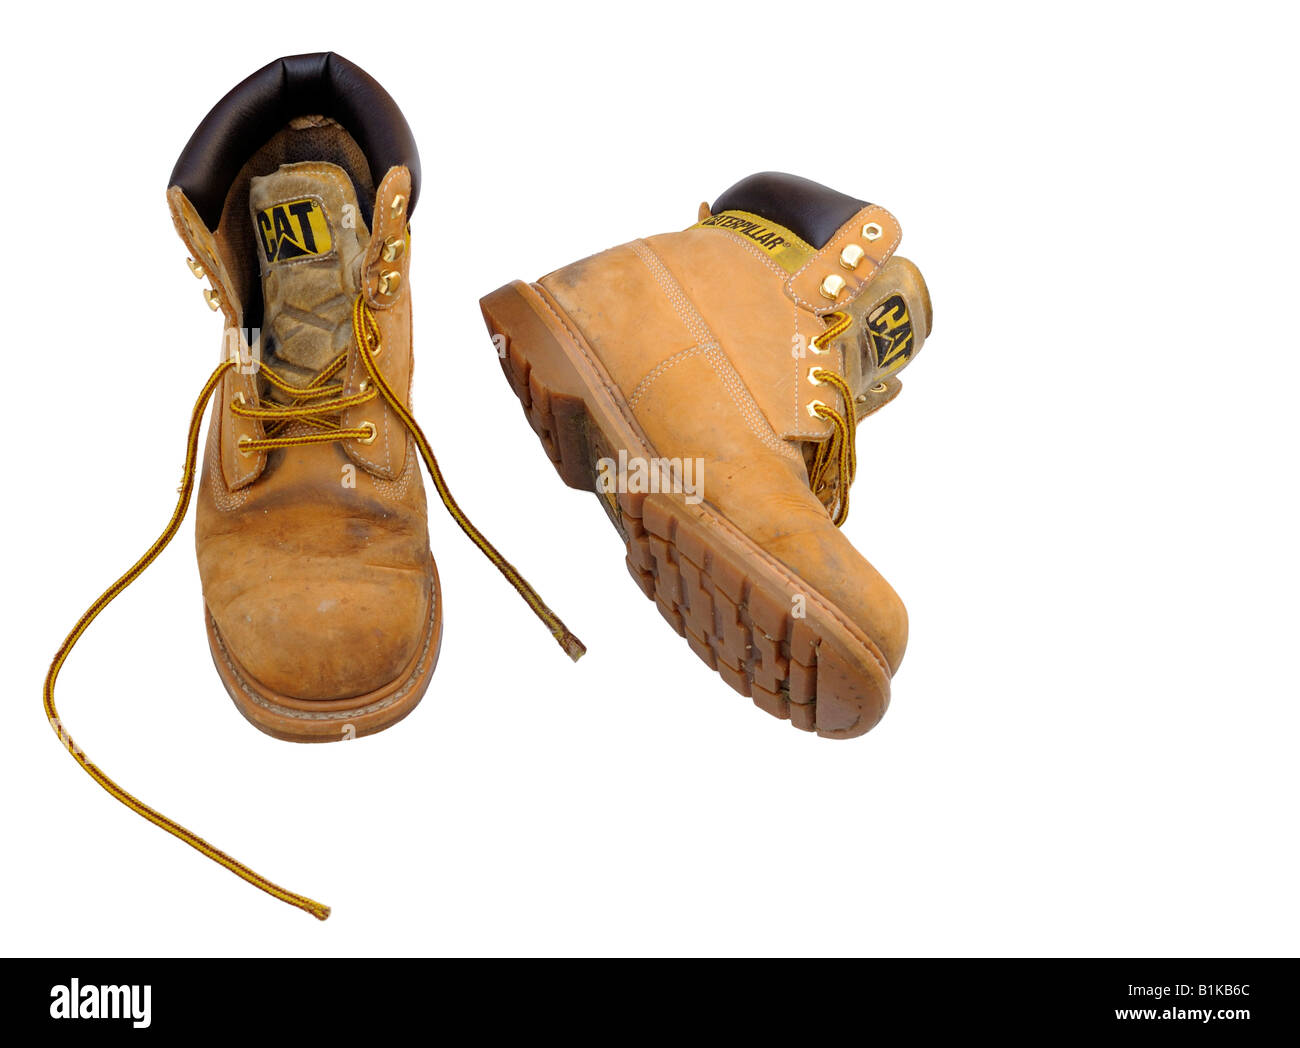 Caterpillar Boots High Resolution Stock Photography and Images - Alamy